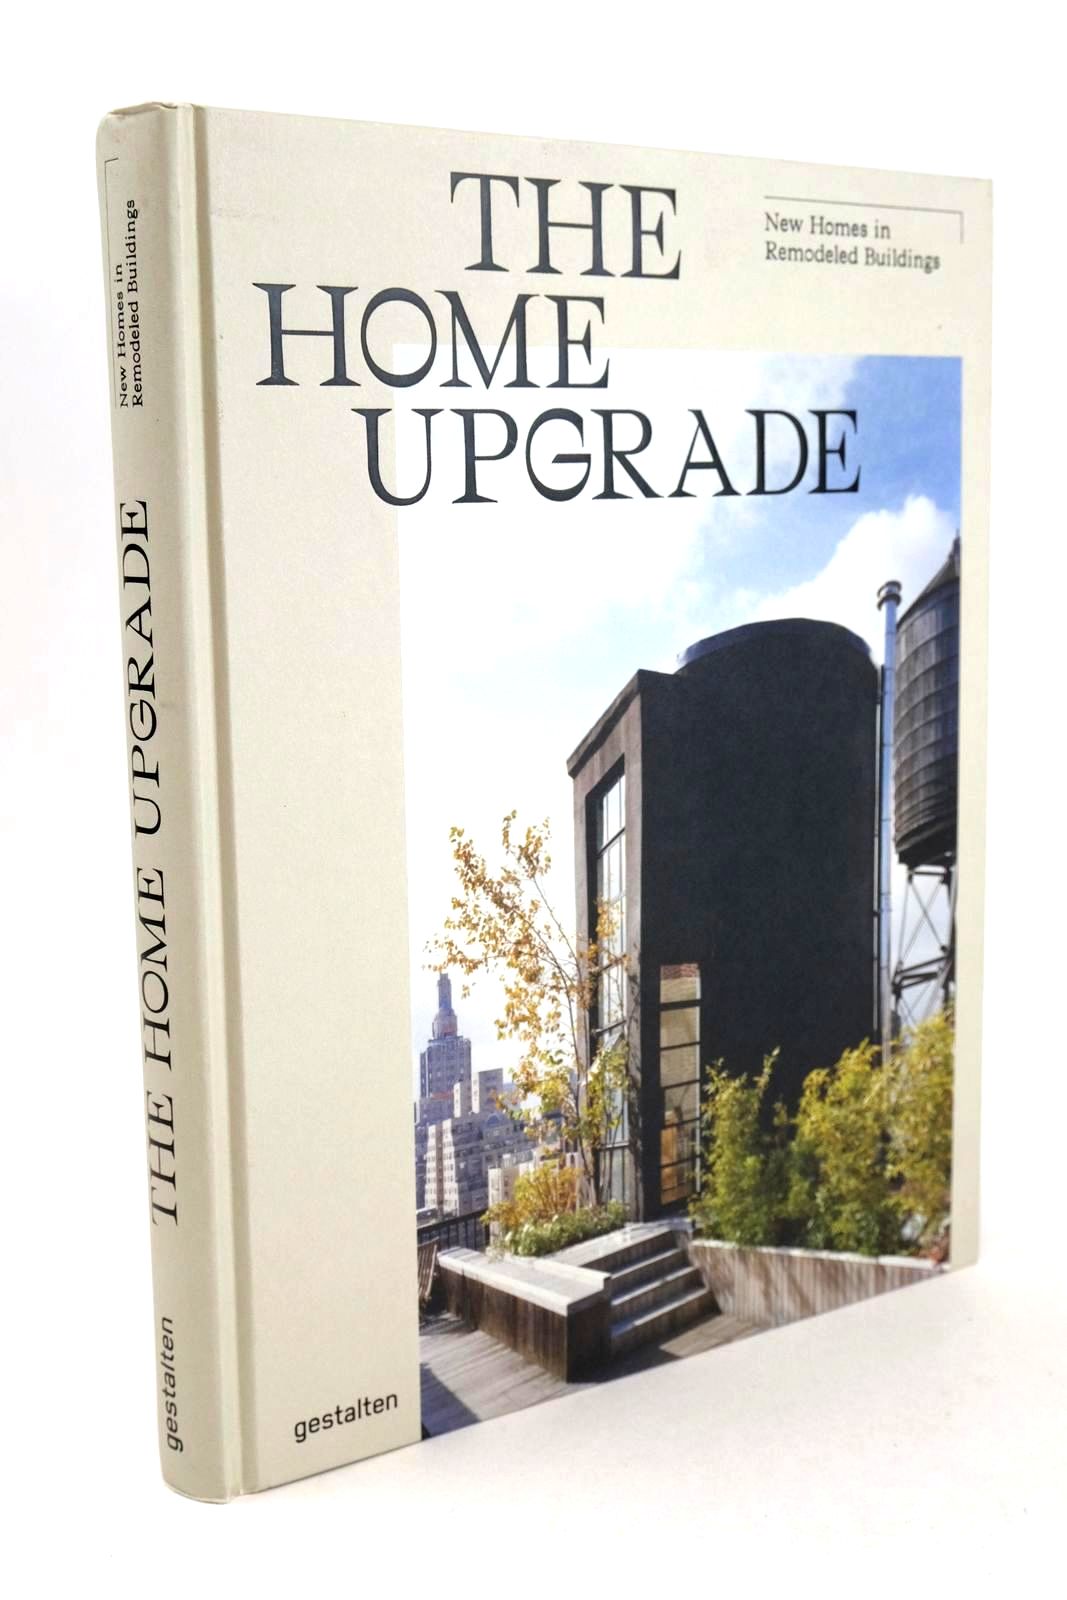 Photo of THE HOME UPGRADE NEW HOMES IN REMODELED BUILDINGS written by Pearson, Tessa Klanten, Robert Servert, Andrea Stuhler, Elli published by Gestalten (STOCK CODE: 1326513)  for sale by Stella & Rose's Books